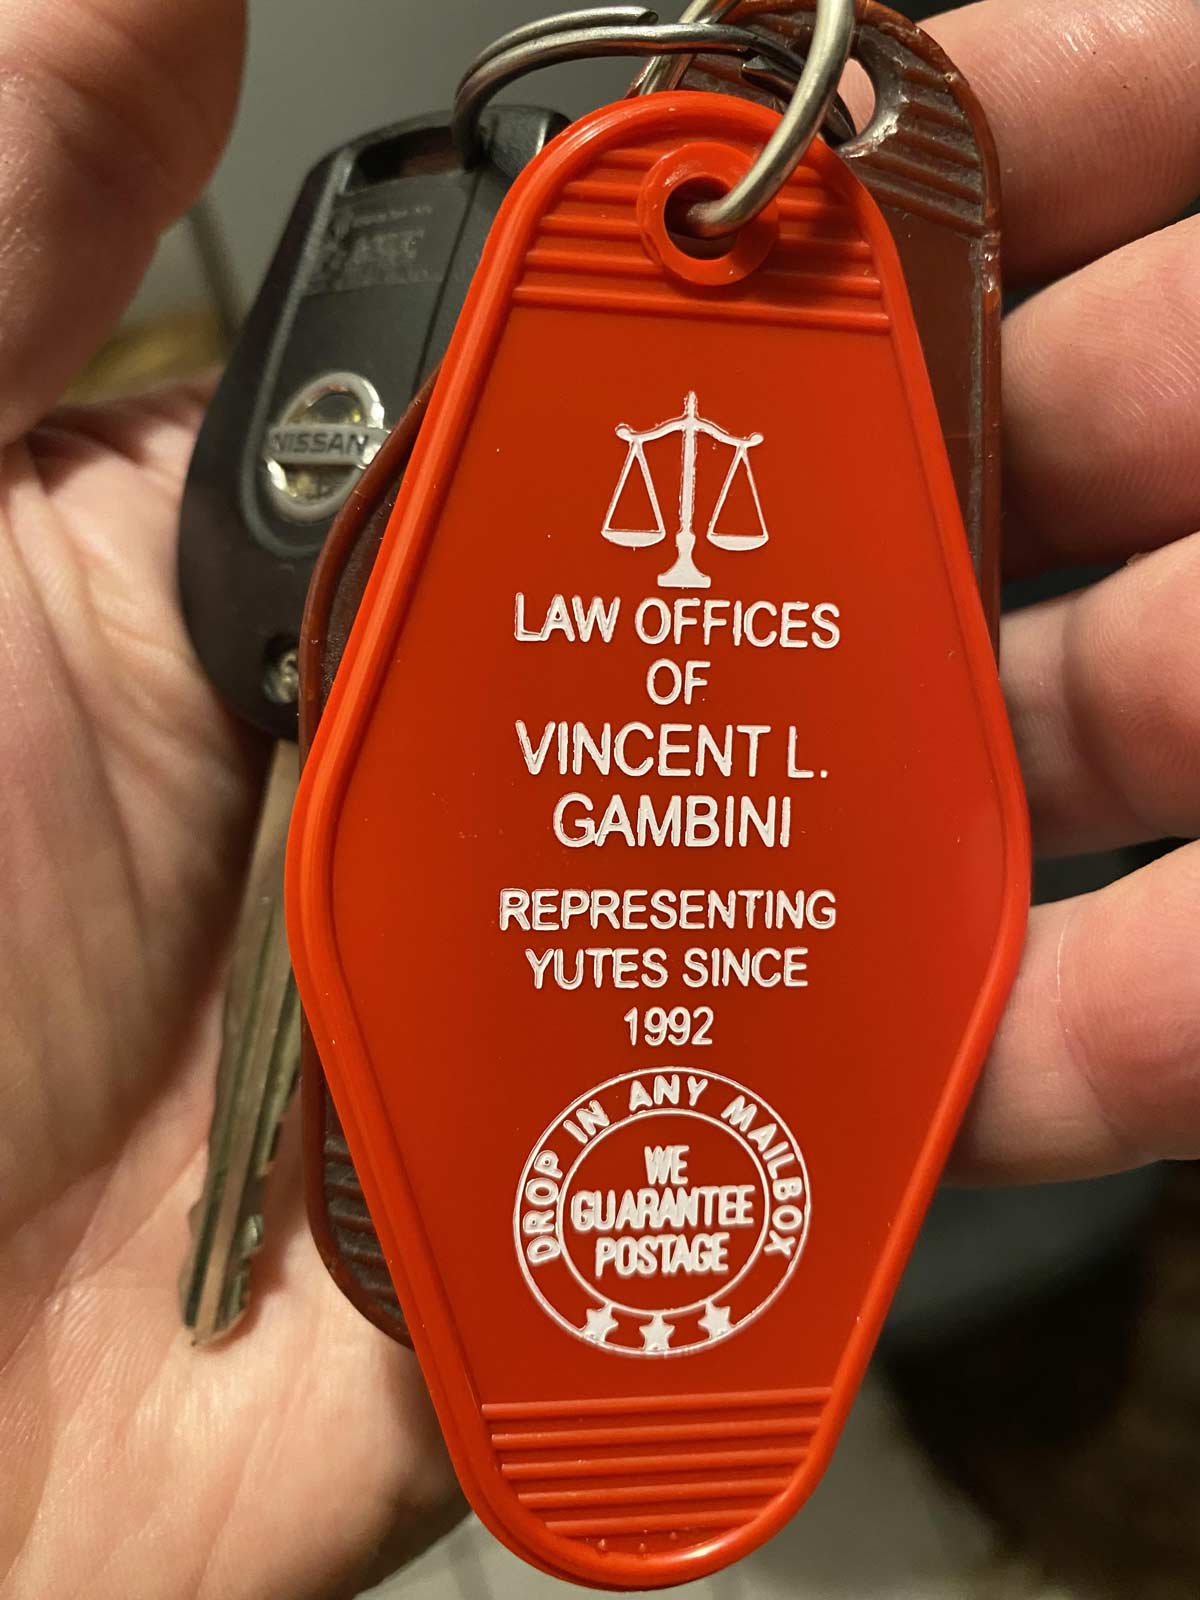 My wife got me this keychain for Father’s Day